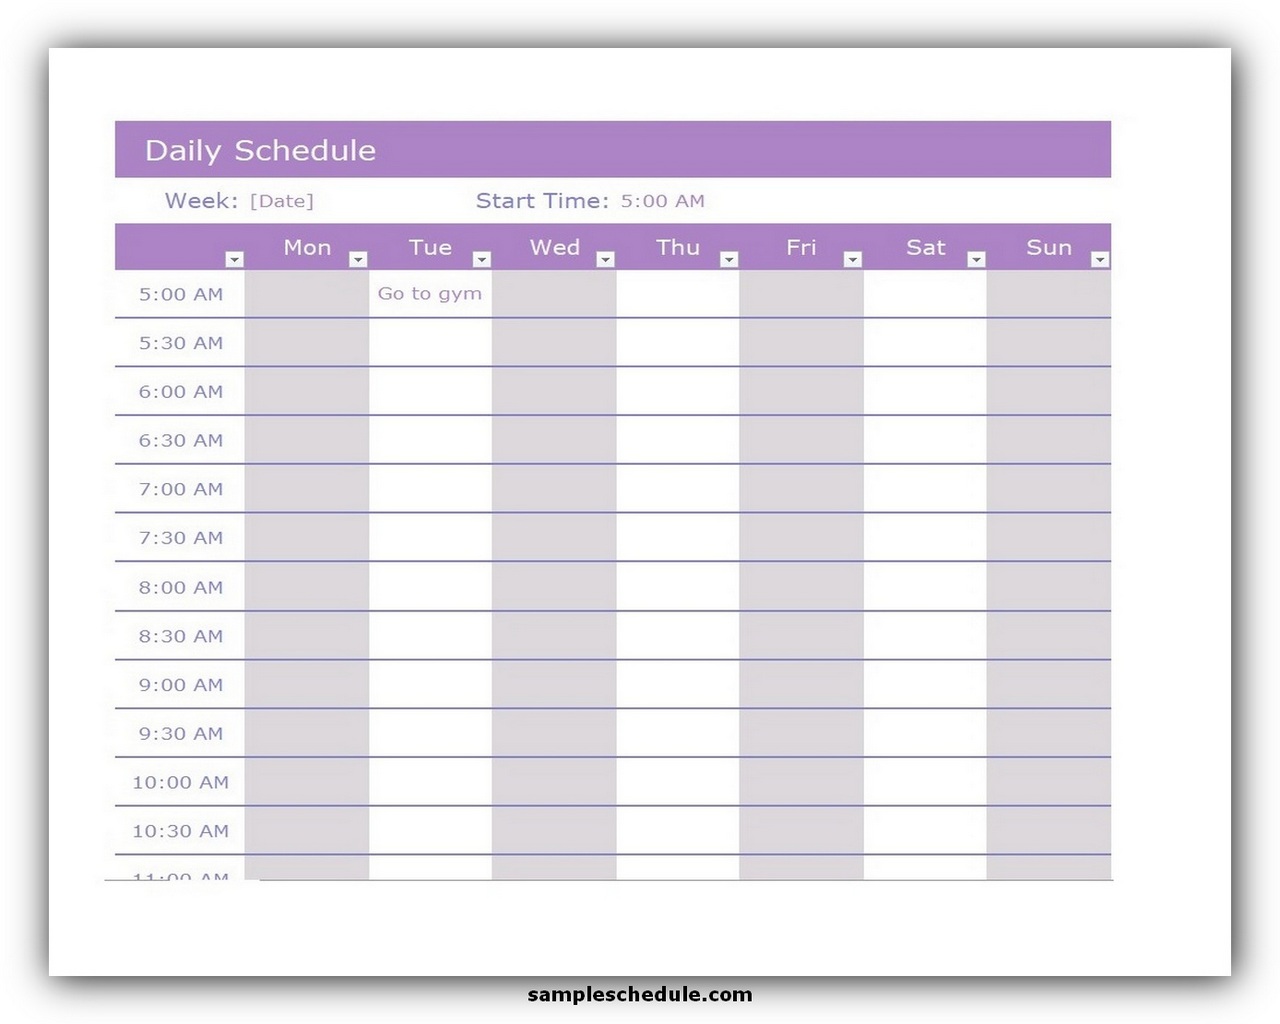 11-daily-schedule-template-excel-free-sample-schedule